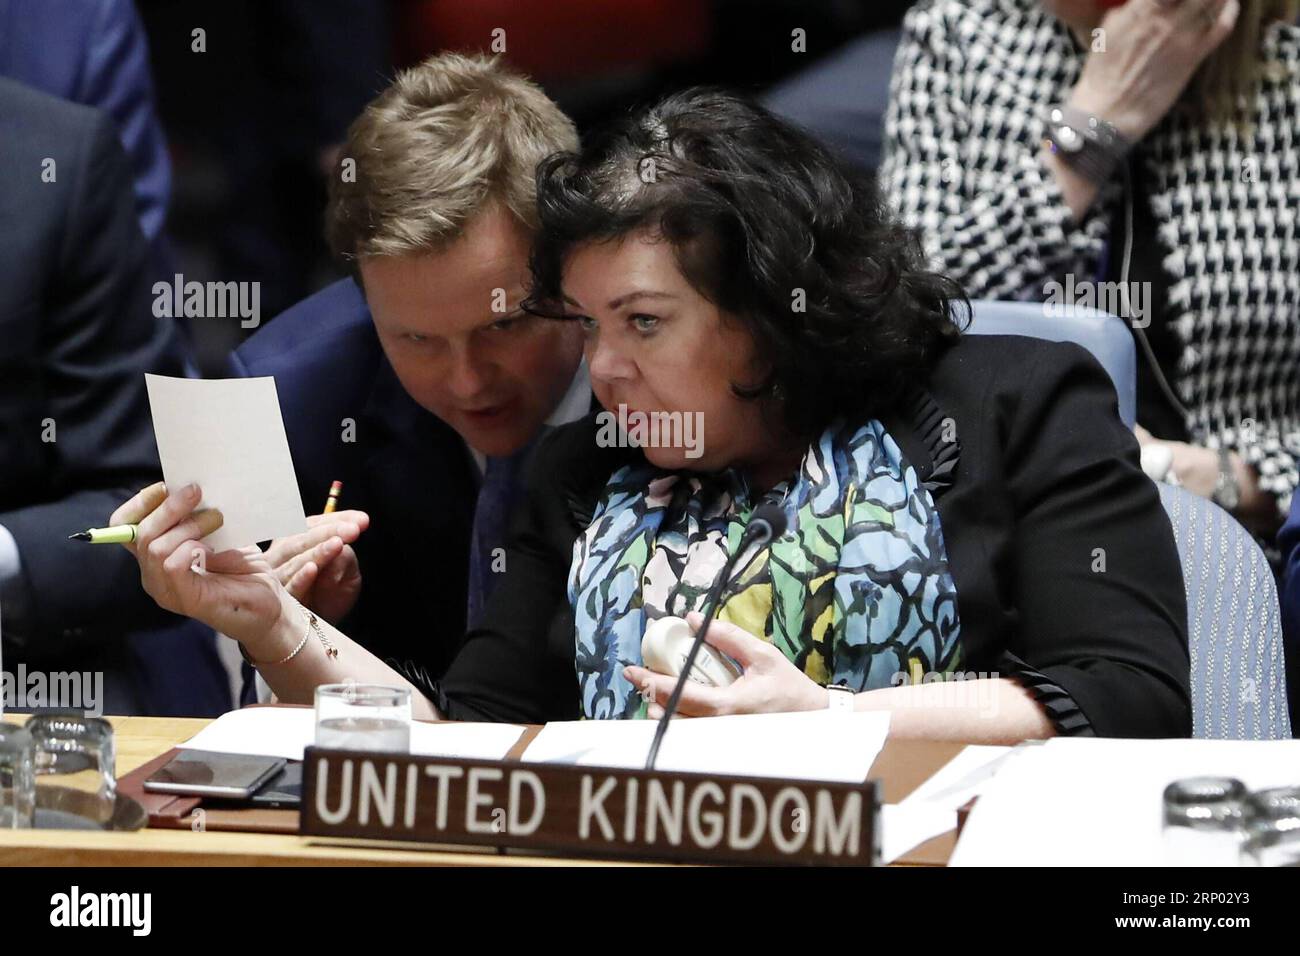 (180414) -- UNTIED NATIONS, April 14, 2018 -- British Ambassador to the United Nations Karen Pierce (Front) listens to one of her delegation during a Security Council emergency meeting on Syria at the UN headquarters in New York, April 14, 2018. UN Security Council held an emergency meeting on Syria requested by Russia on Saturday. UN Secretary-General Antonio Guterres expressed concern over Friday s joint military action against Syria by the United States, France and Britain, and called for adherence to the UN Charter and international law on the issue. ) UN-SECURITY COUNCIL-SYRIA-EMERGENCY M Stock Photo